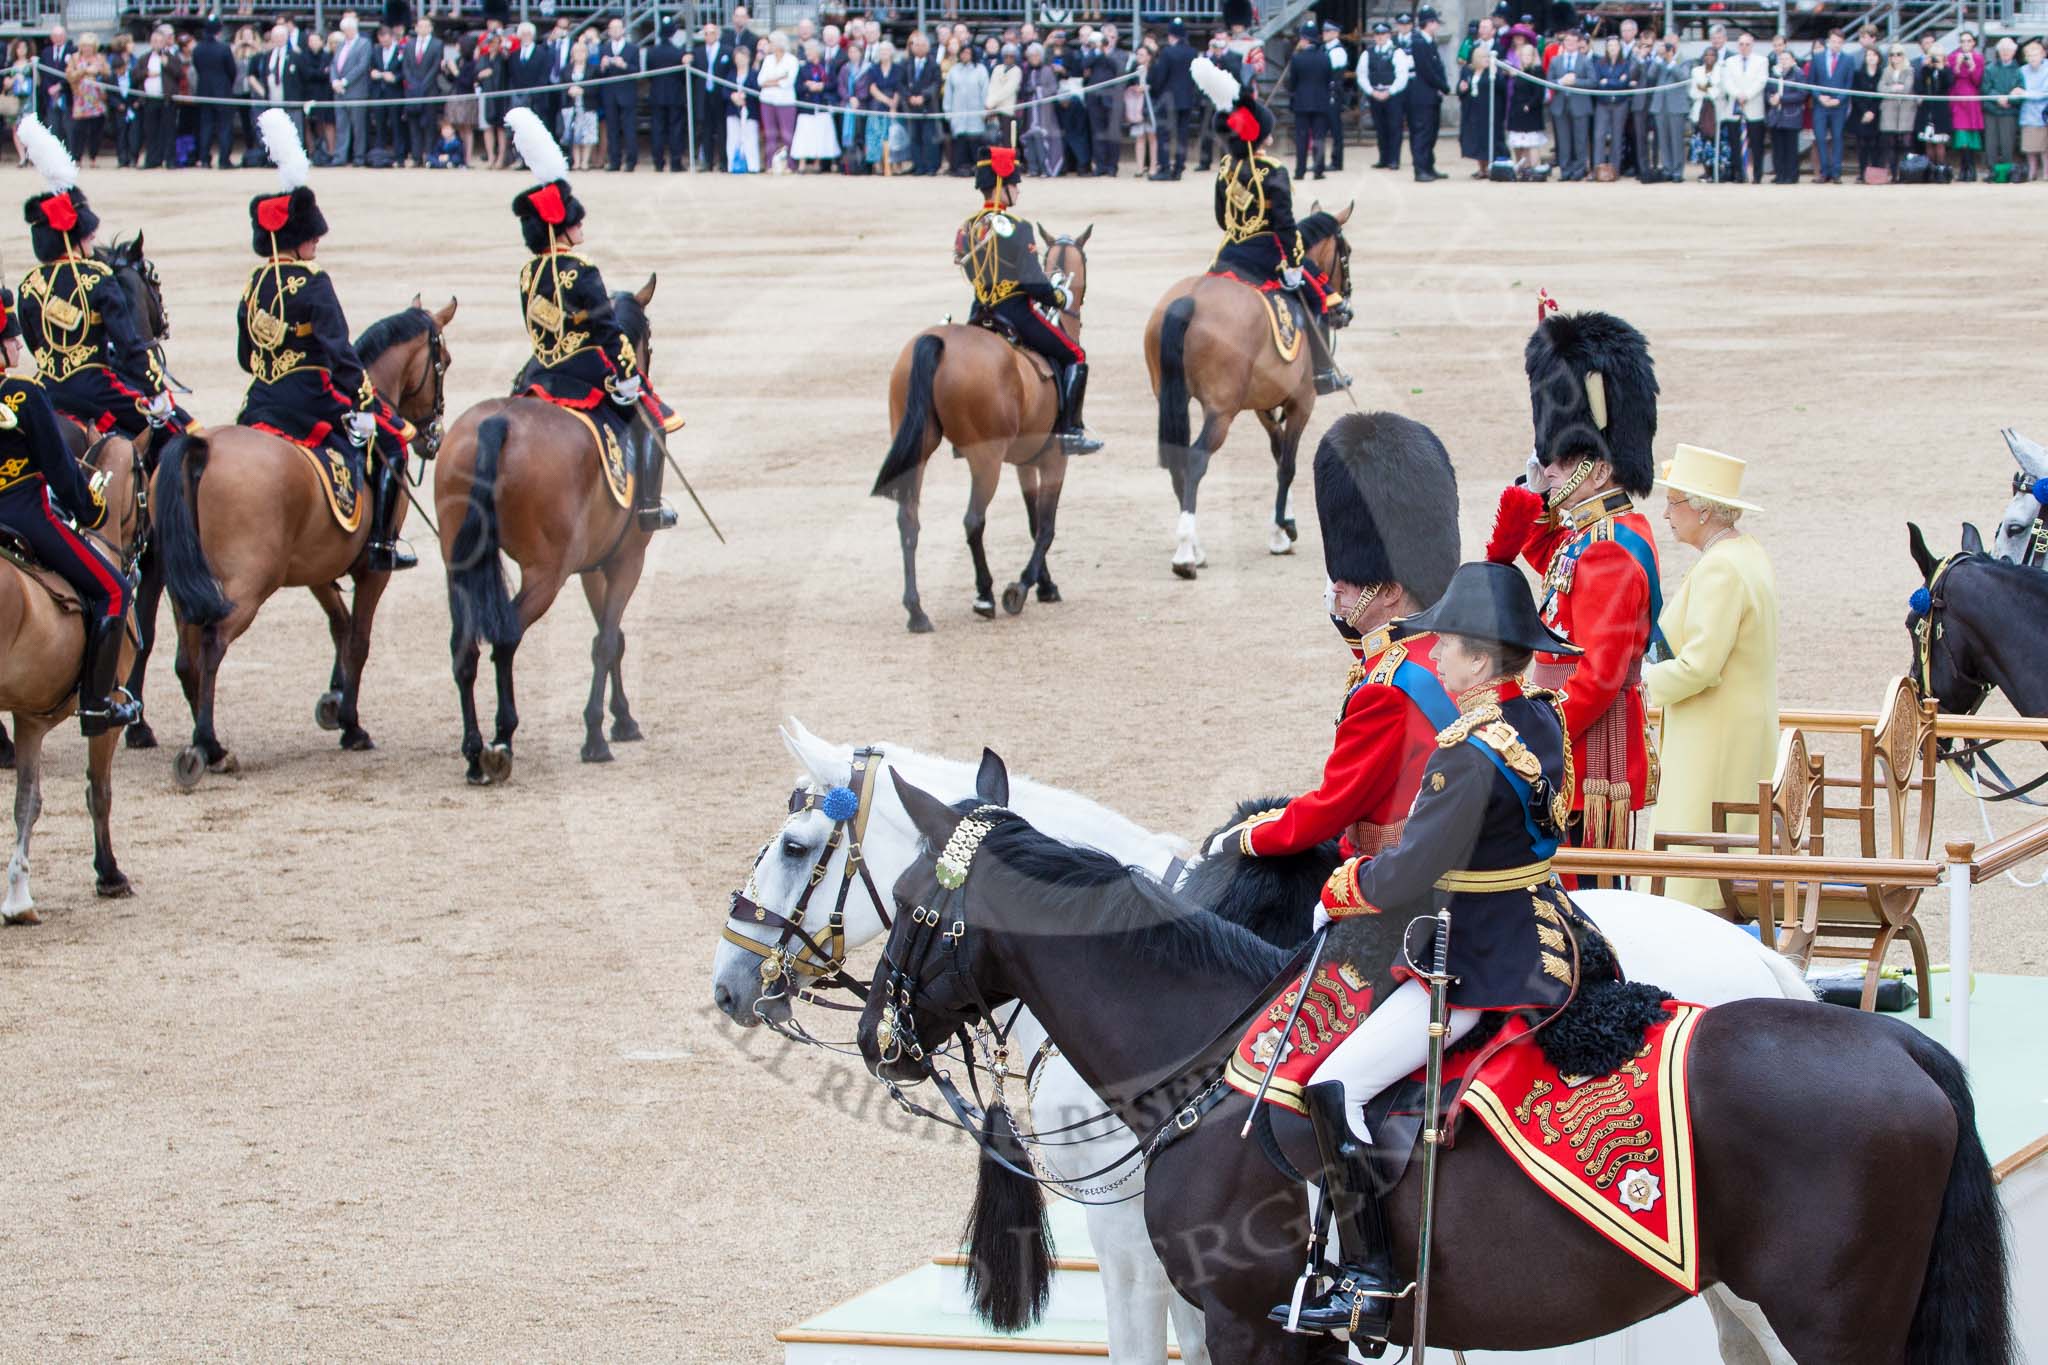 Trooping the Colour 2012: The Royal Colonels and HRH The Prince Philip saltuting during the Ride Past of the Royal Horse Artillery..
Horse Guards Parade, Westminster,
London SW1,

United Kingdom,
on 16 June 2012 at 11:55, image #550